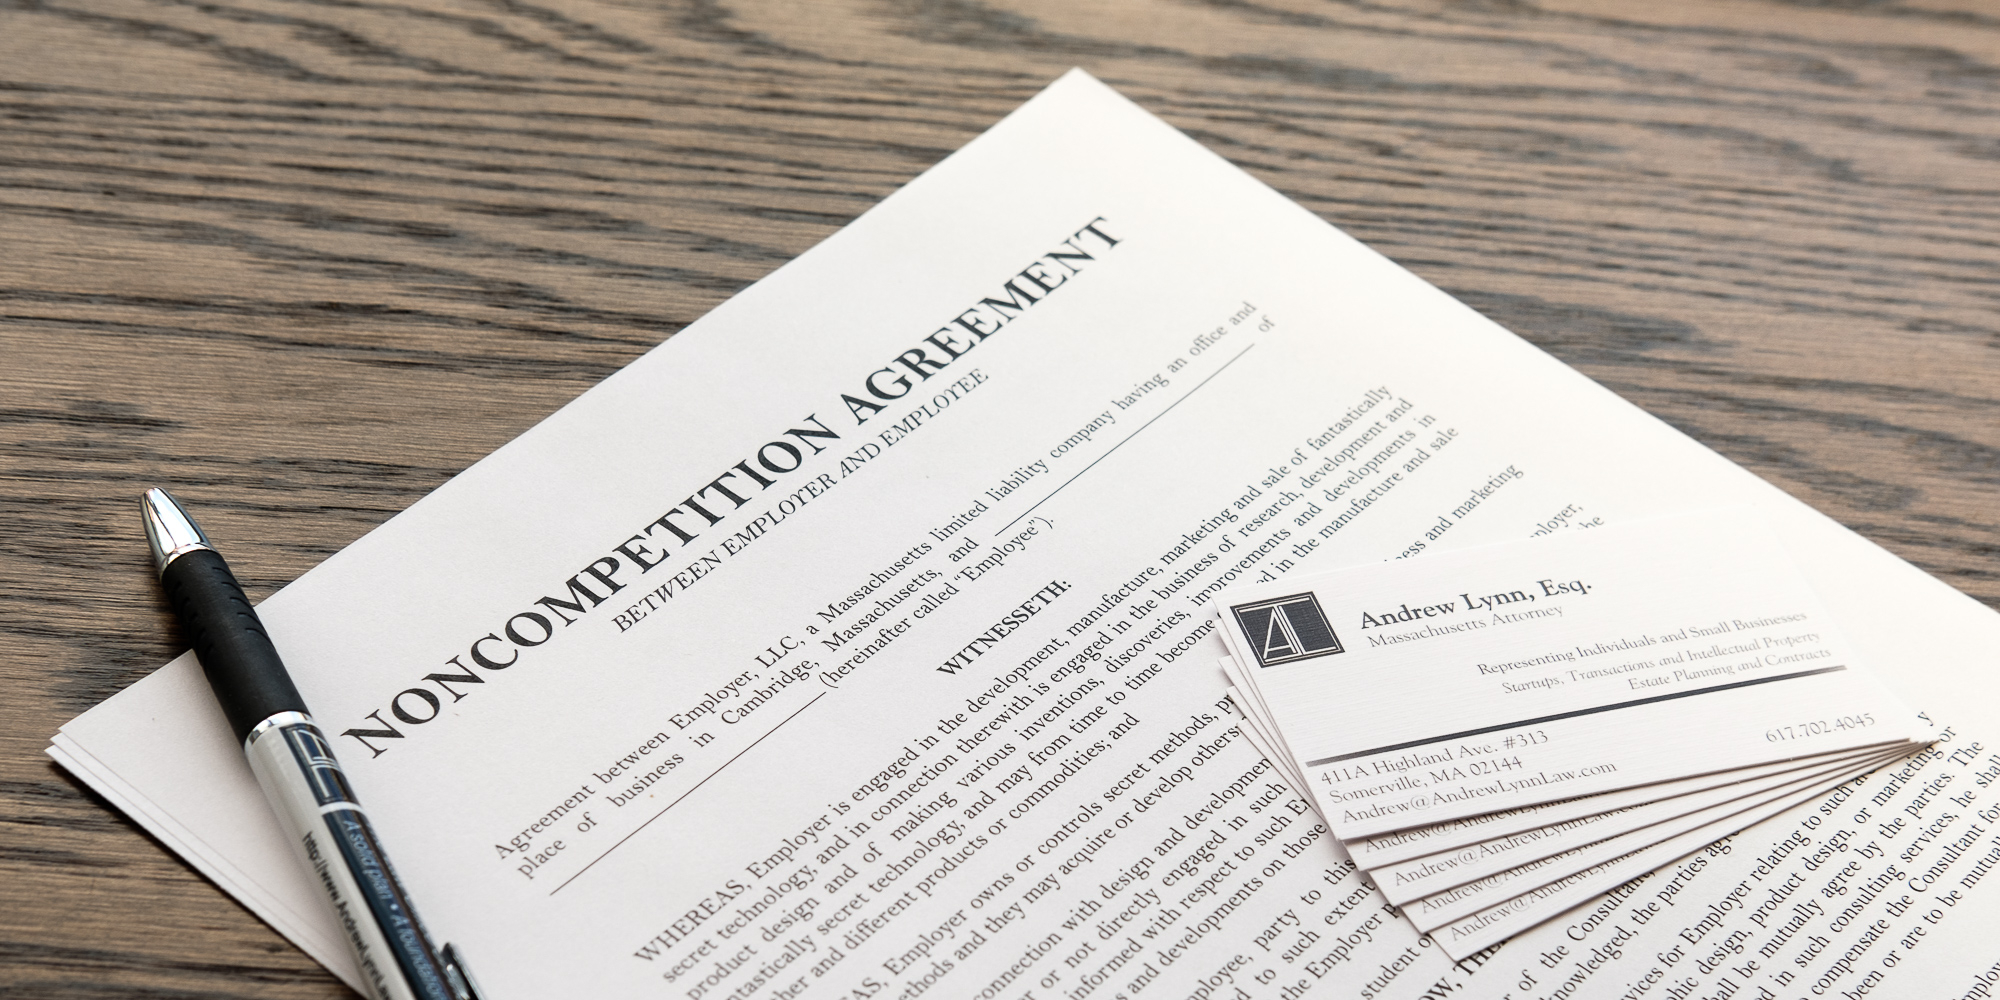 Non Compete Agreements In Massachusetts Massachusetts House Passes Noncompete Restrictions The Law Office